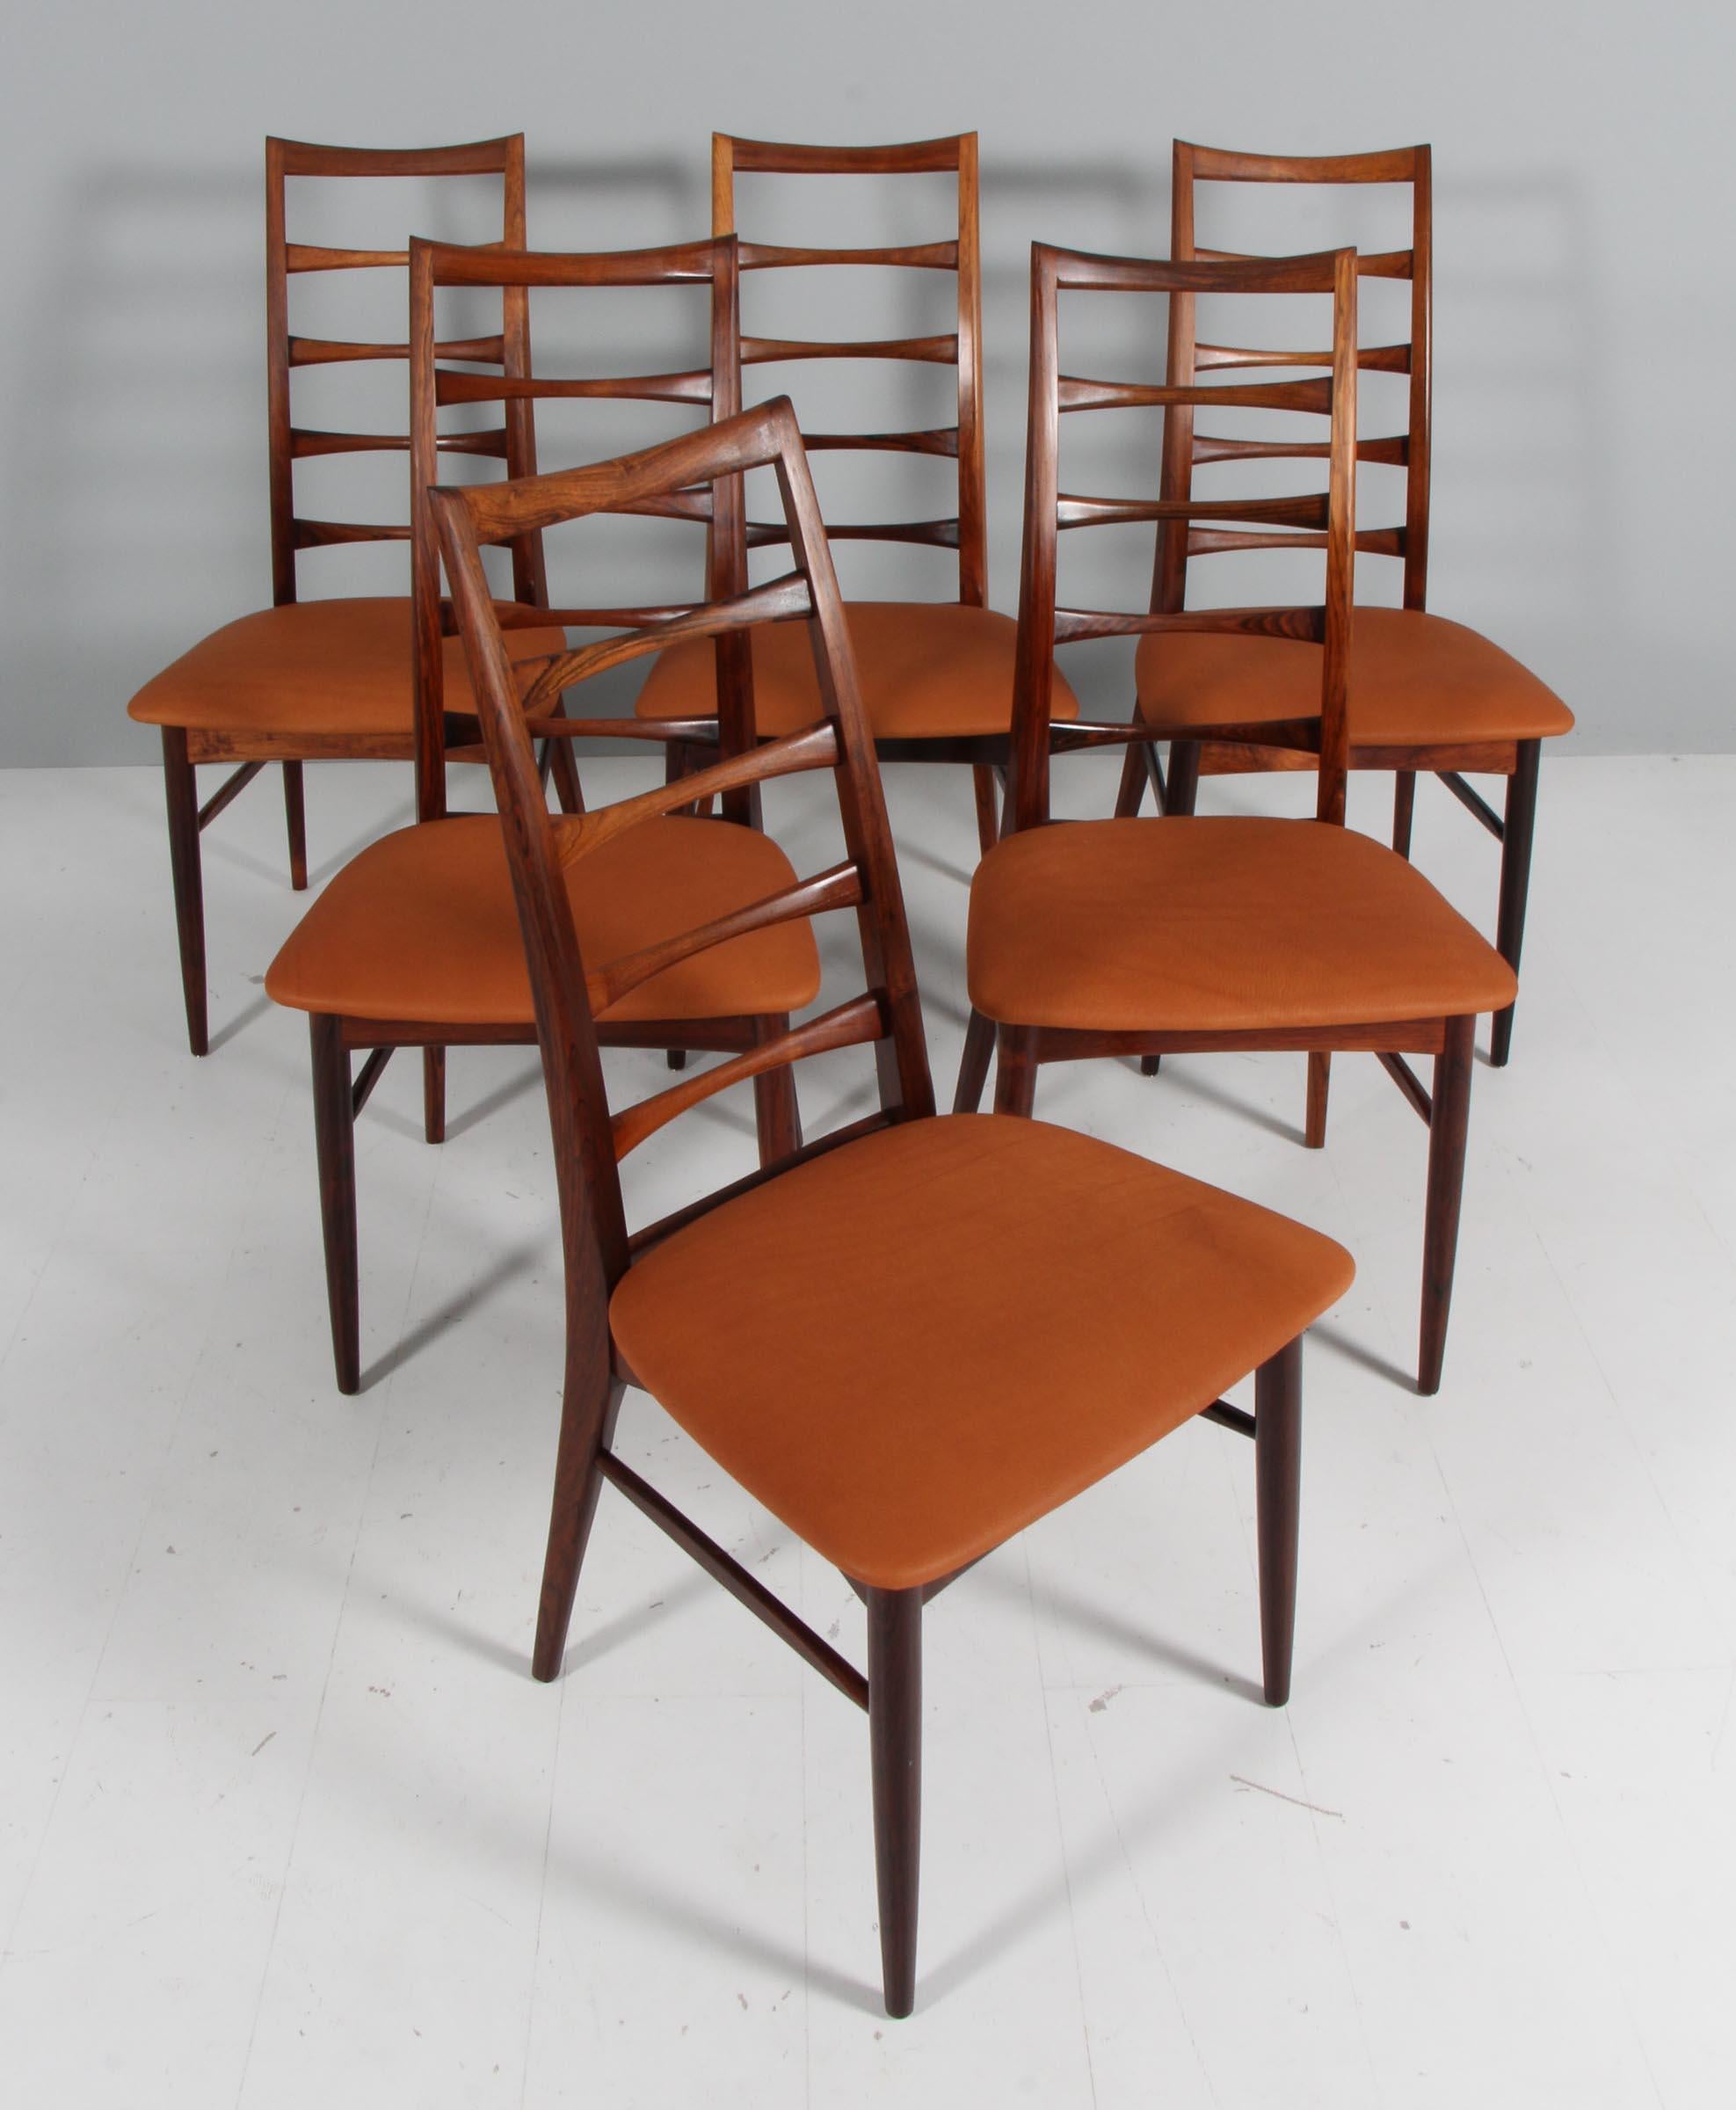 Set of Niels Koefoed dining chairs made in rosewood

New upholstered with tan coloured full grain aniline leather.

Model Lis, made by Niels Koefoeds Møbelfabrik Hornslet, 1960s.

